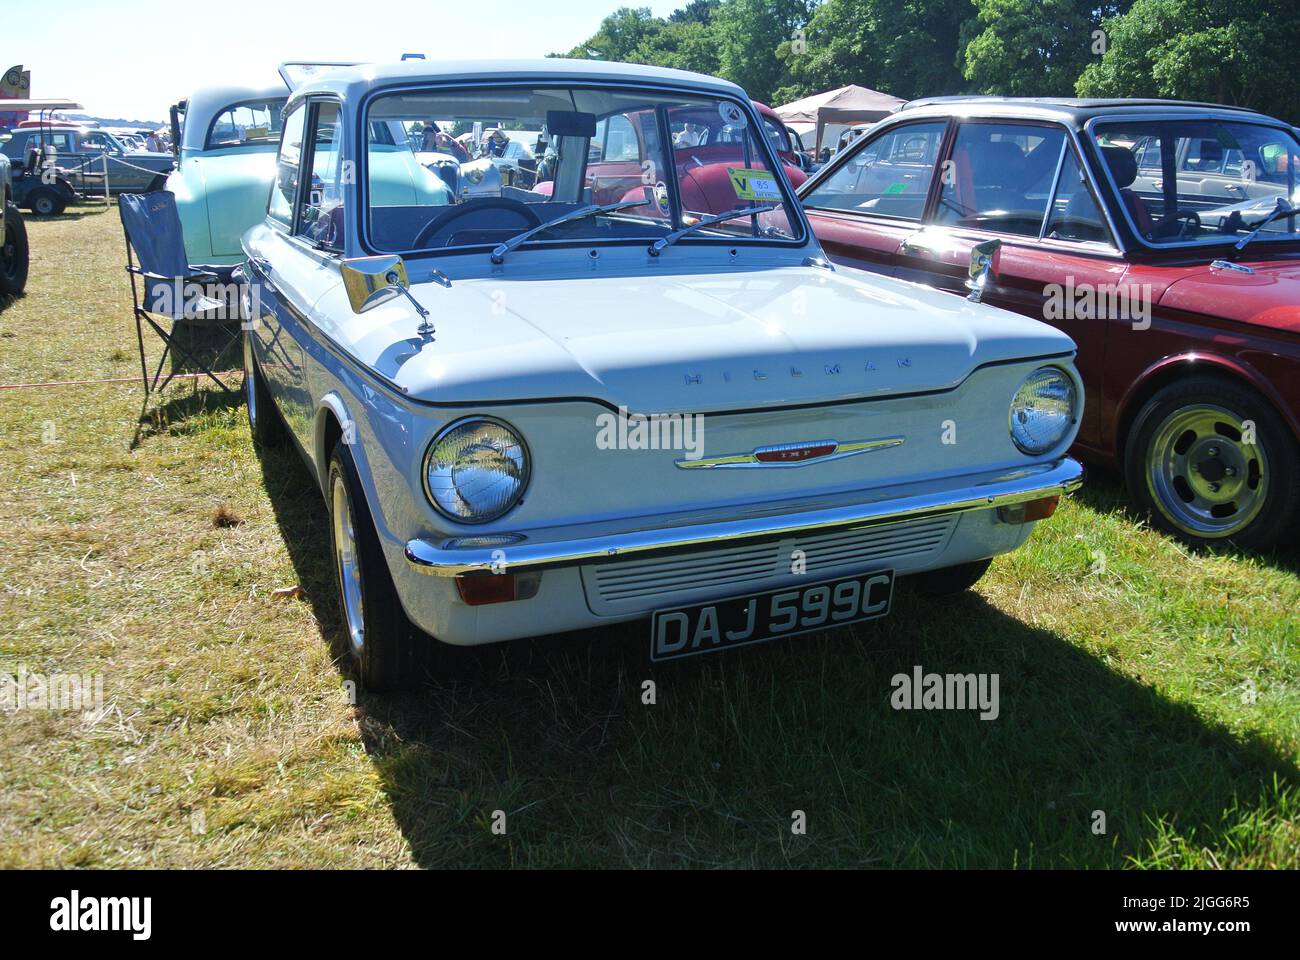 A 1965 Hillman Imp car parked on display at the 47th Historic Vehicle Gathering classic car show, Powderham, Devon, England, UK. Stock Photo